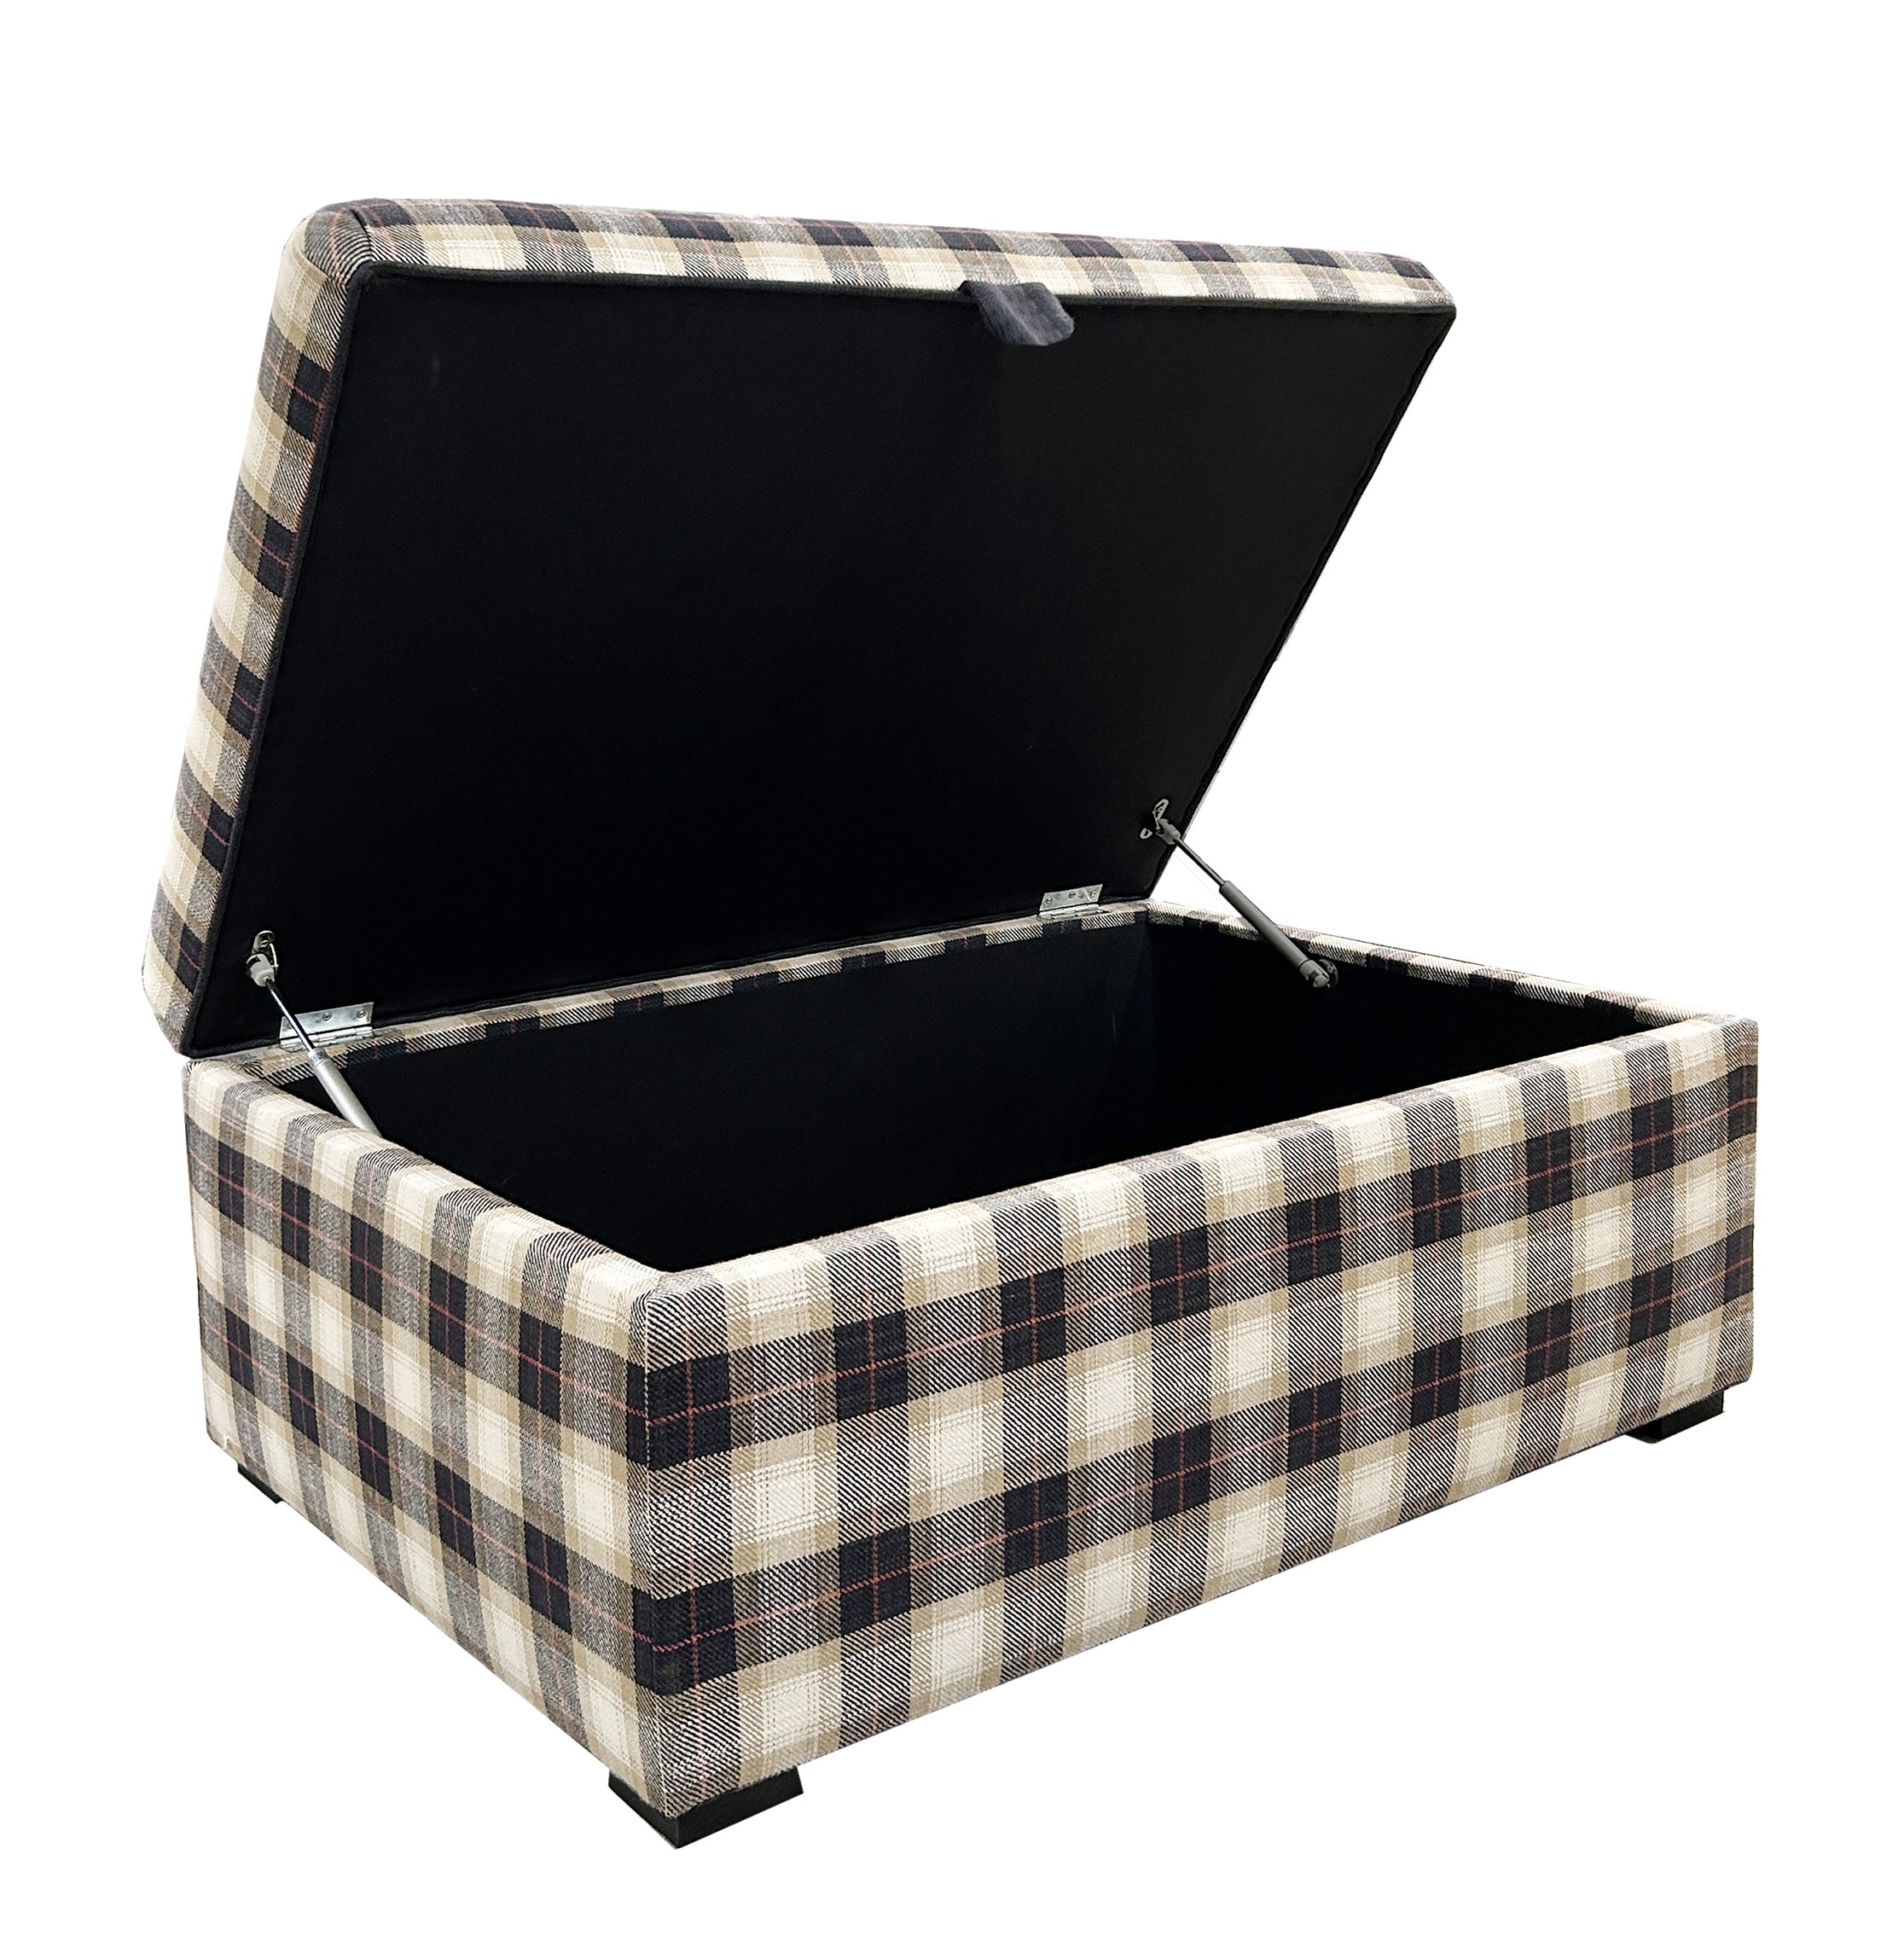 Romsey Footstool with Storage